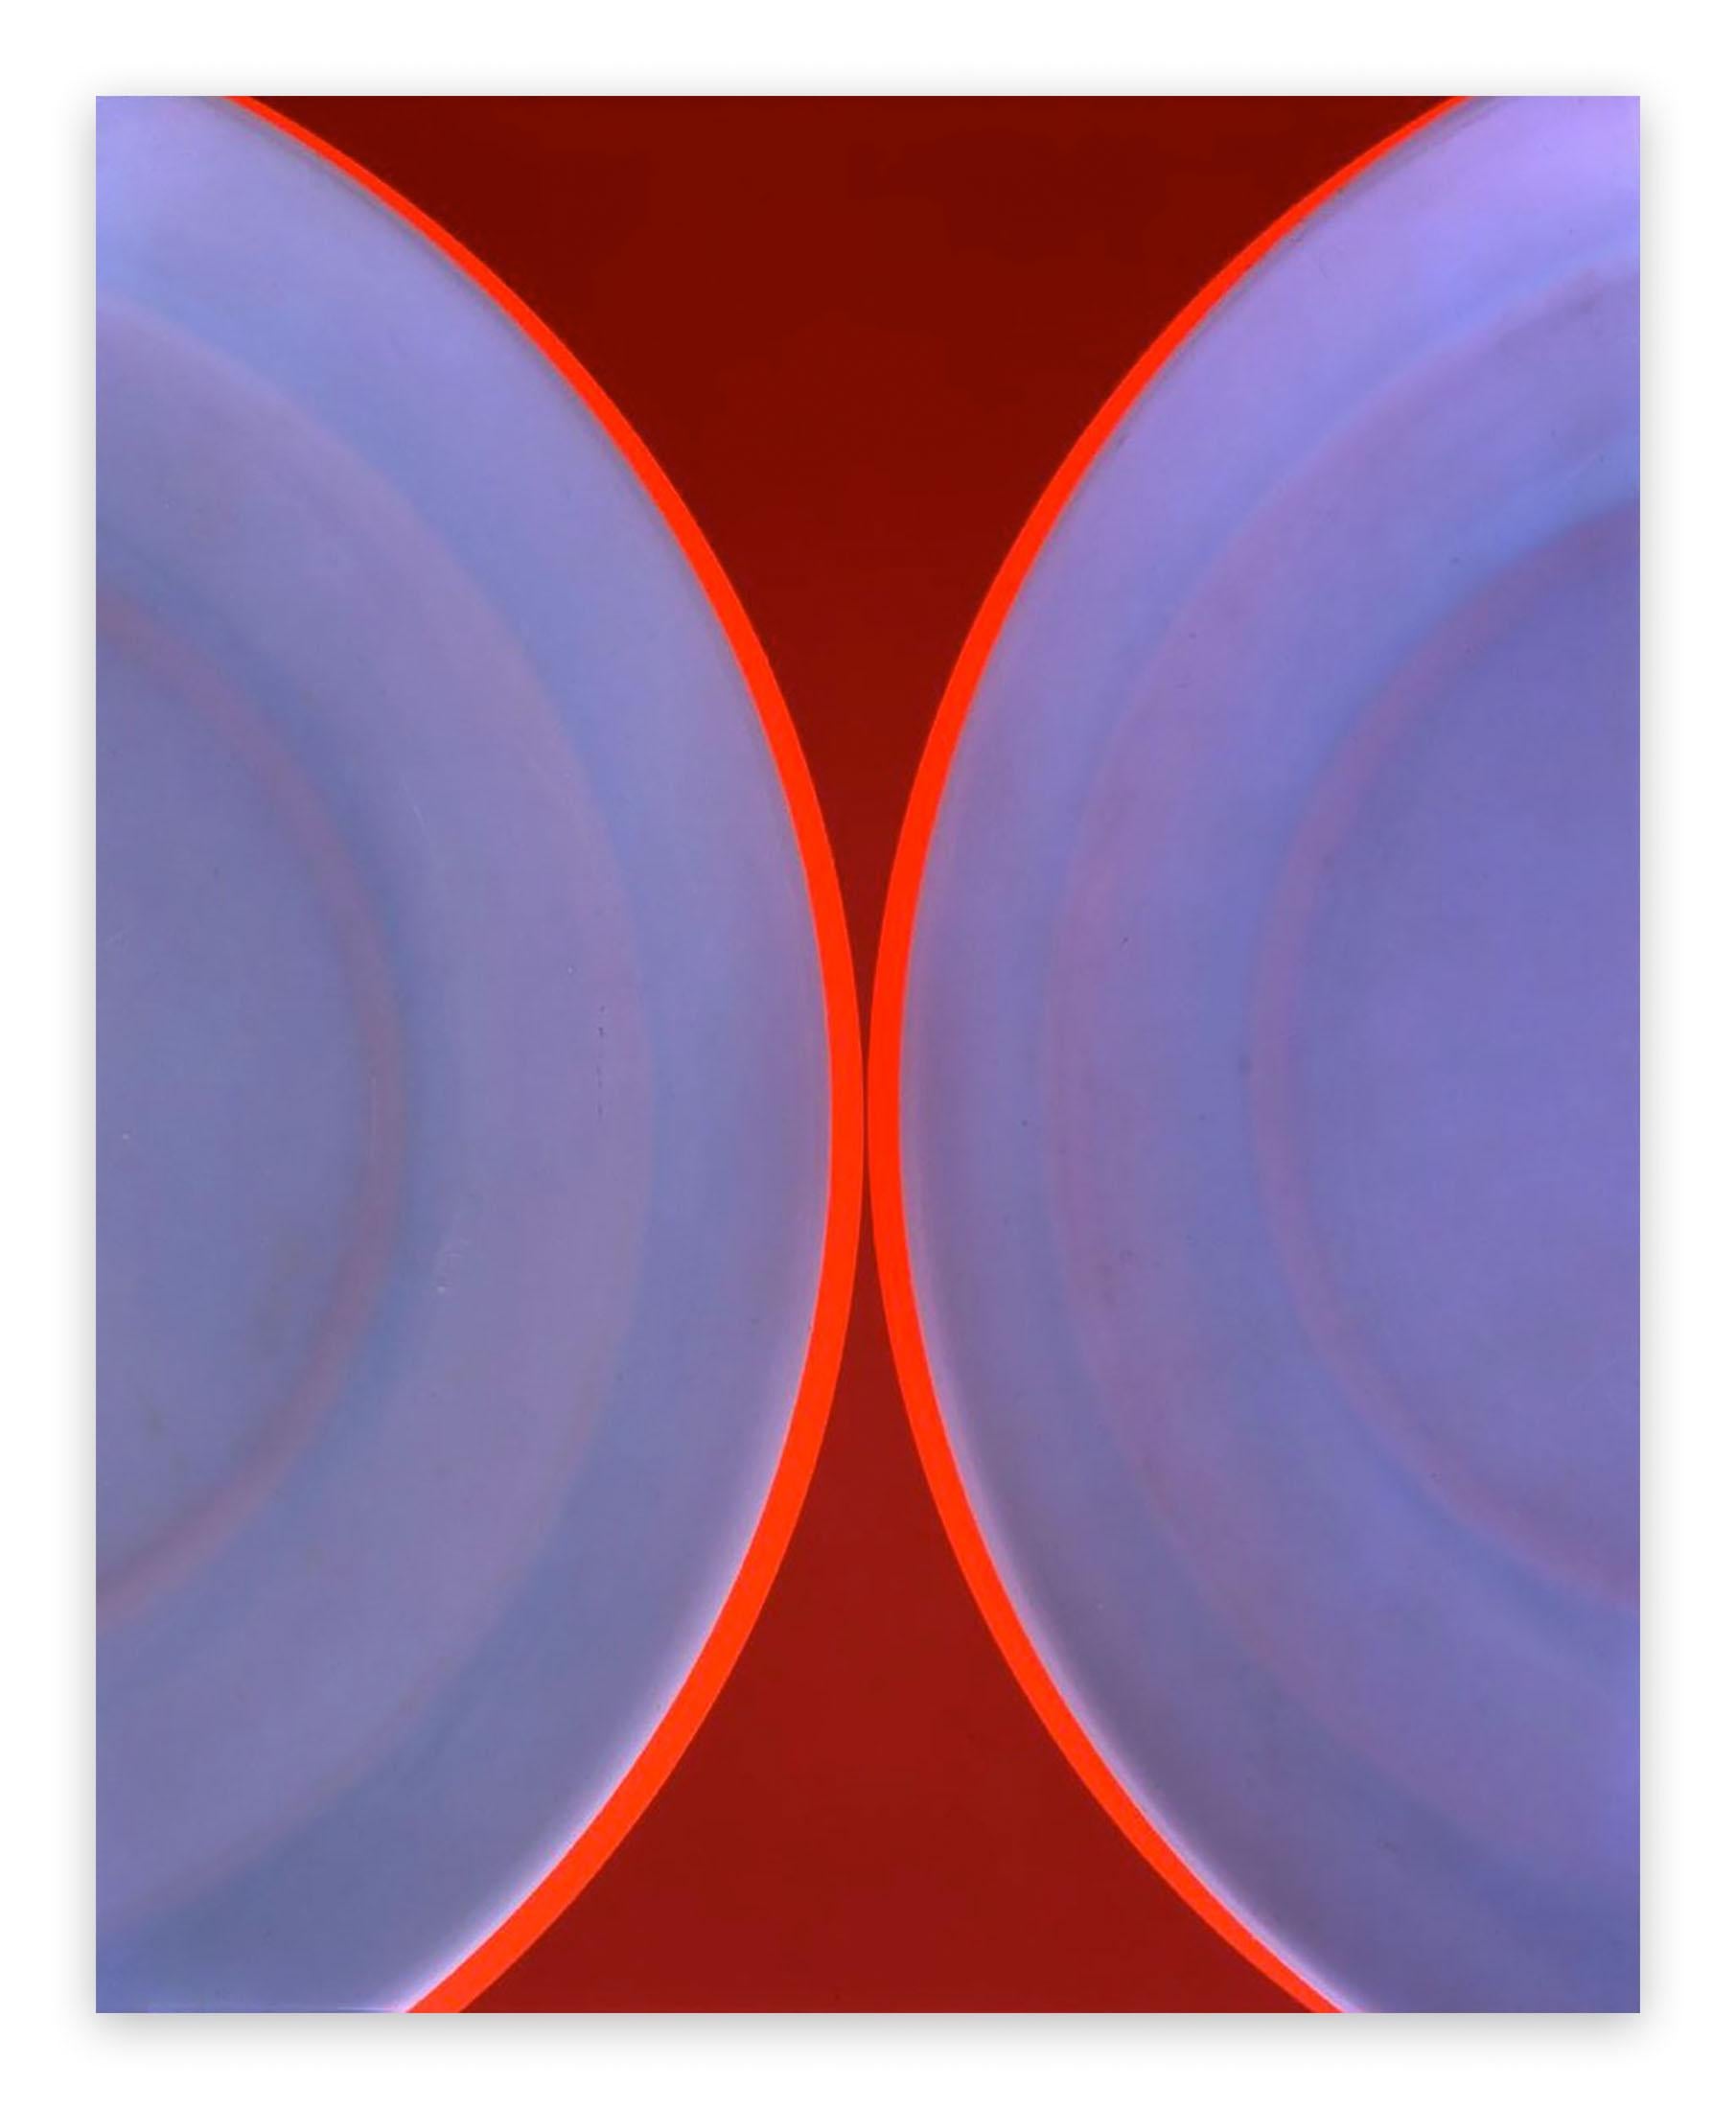 Richard Caldicott Abstract Photograph - Untitled 136 (Abstract painting)